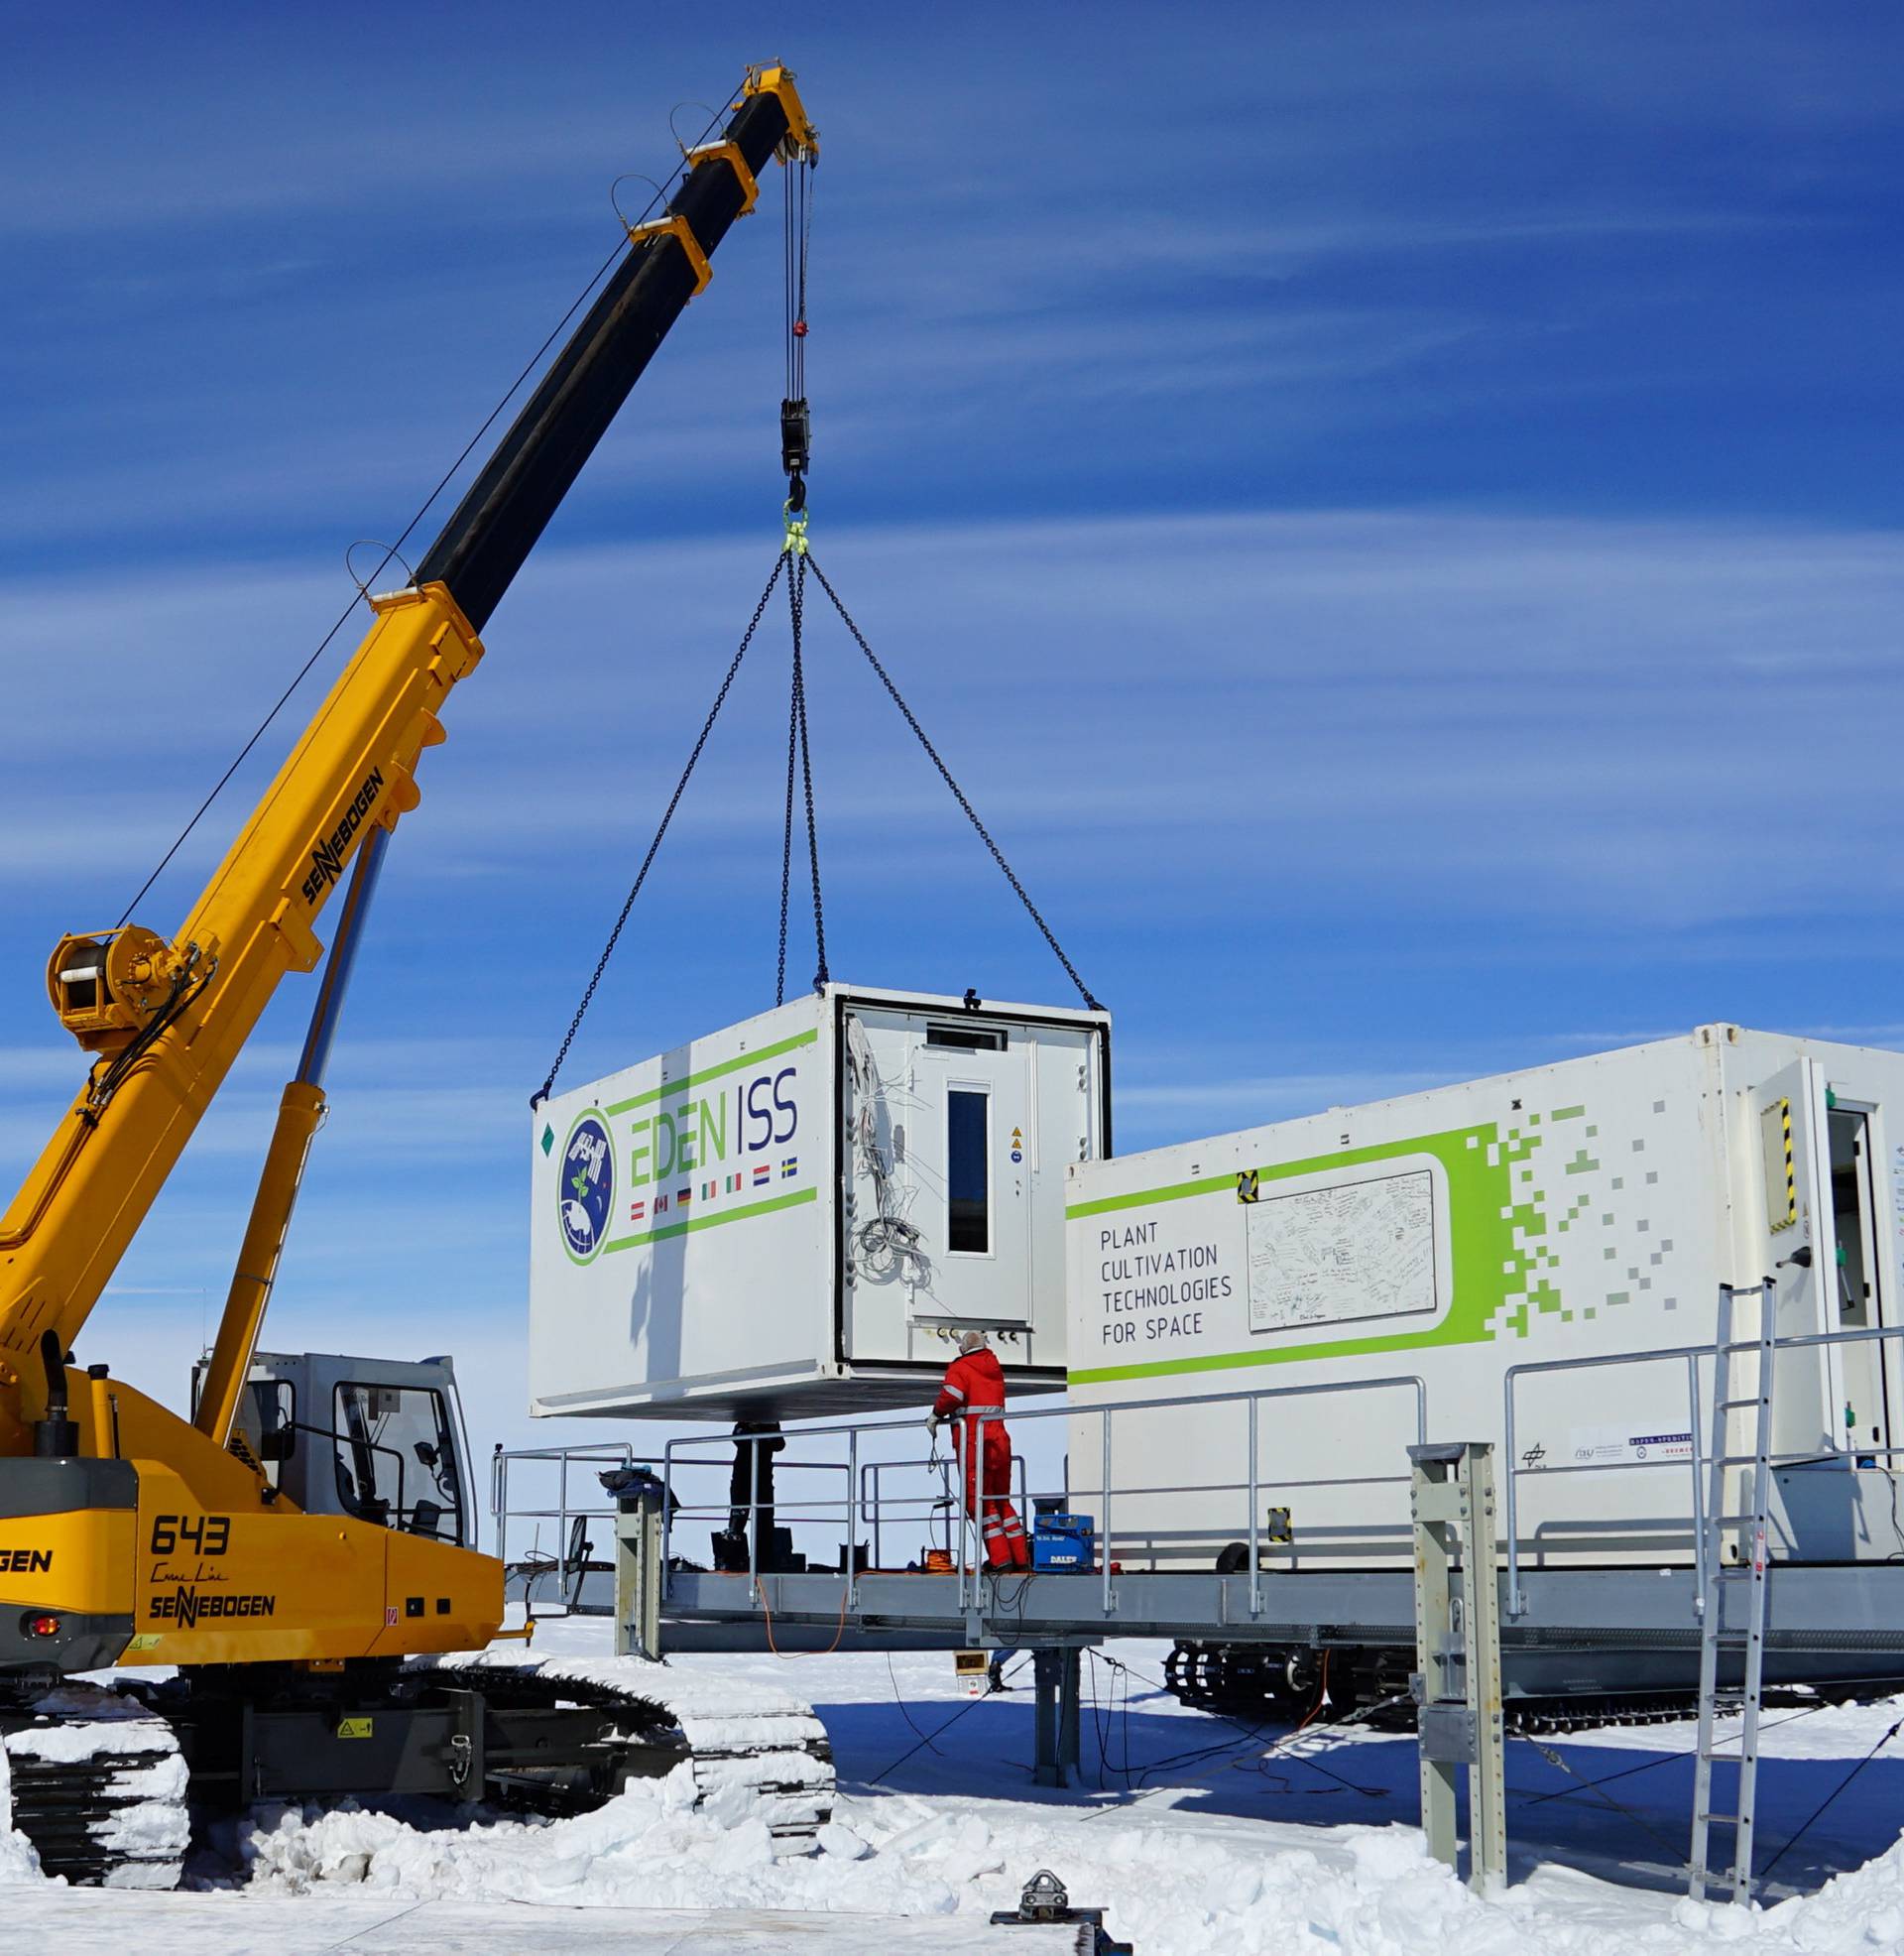 The EDEN ISS greenhouse arrives at its destination in the Antarctic